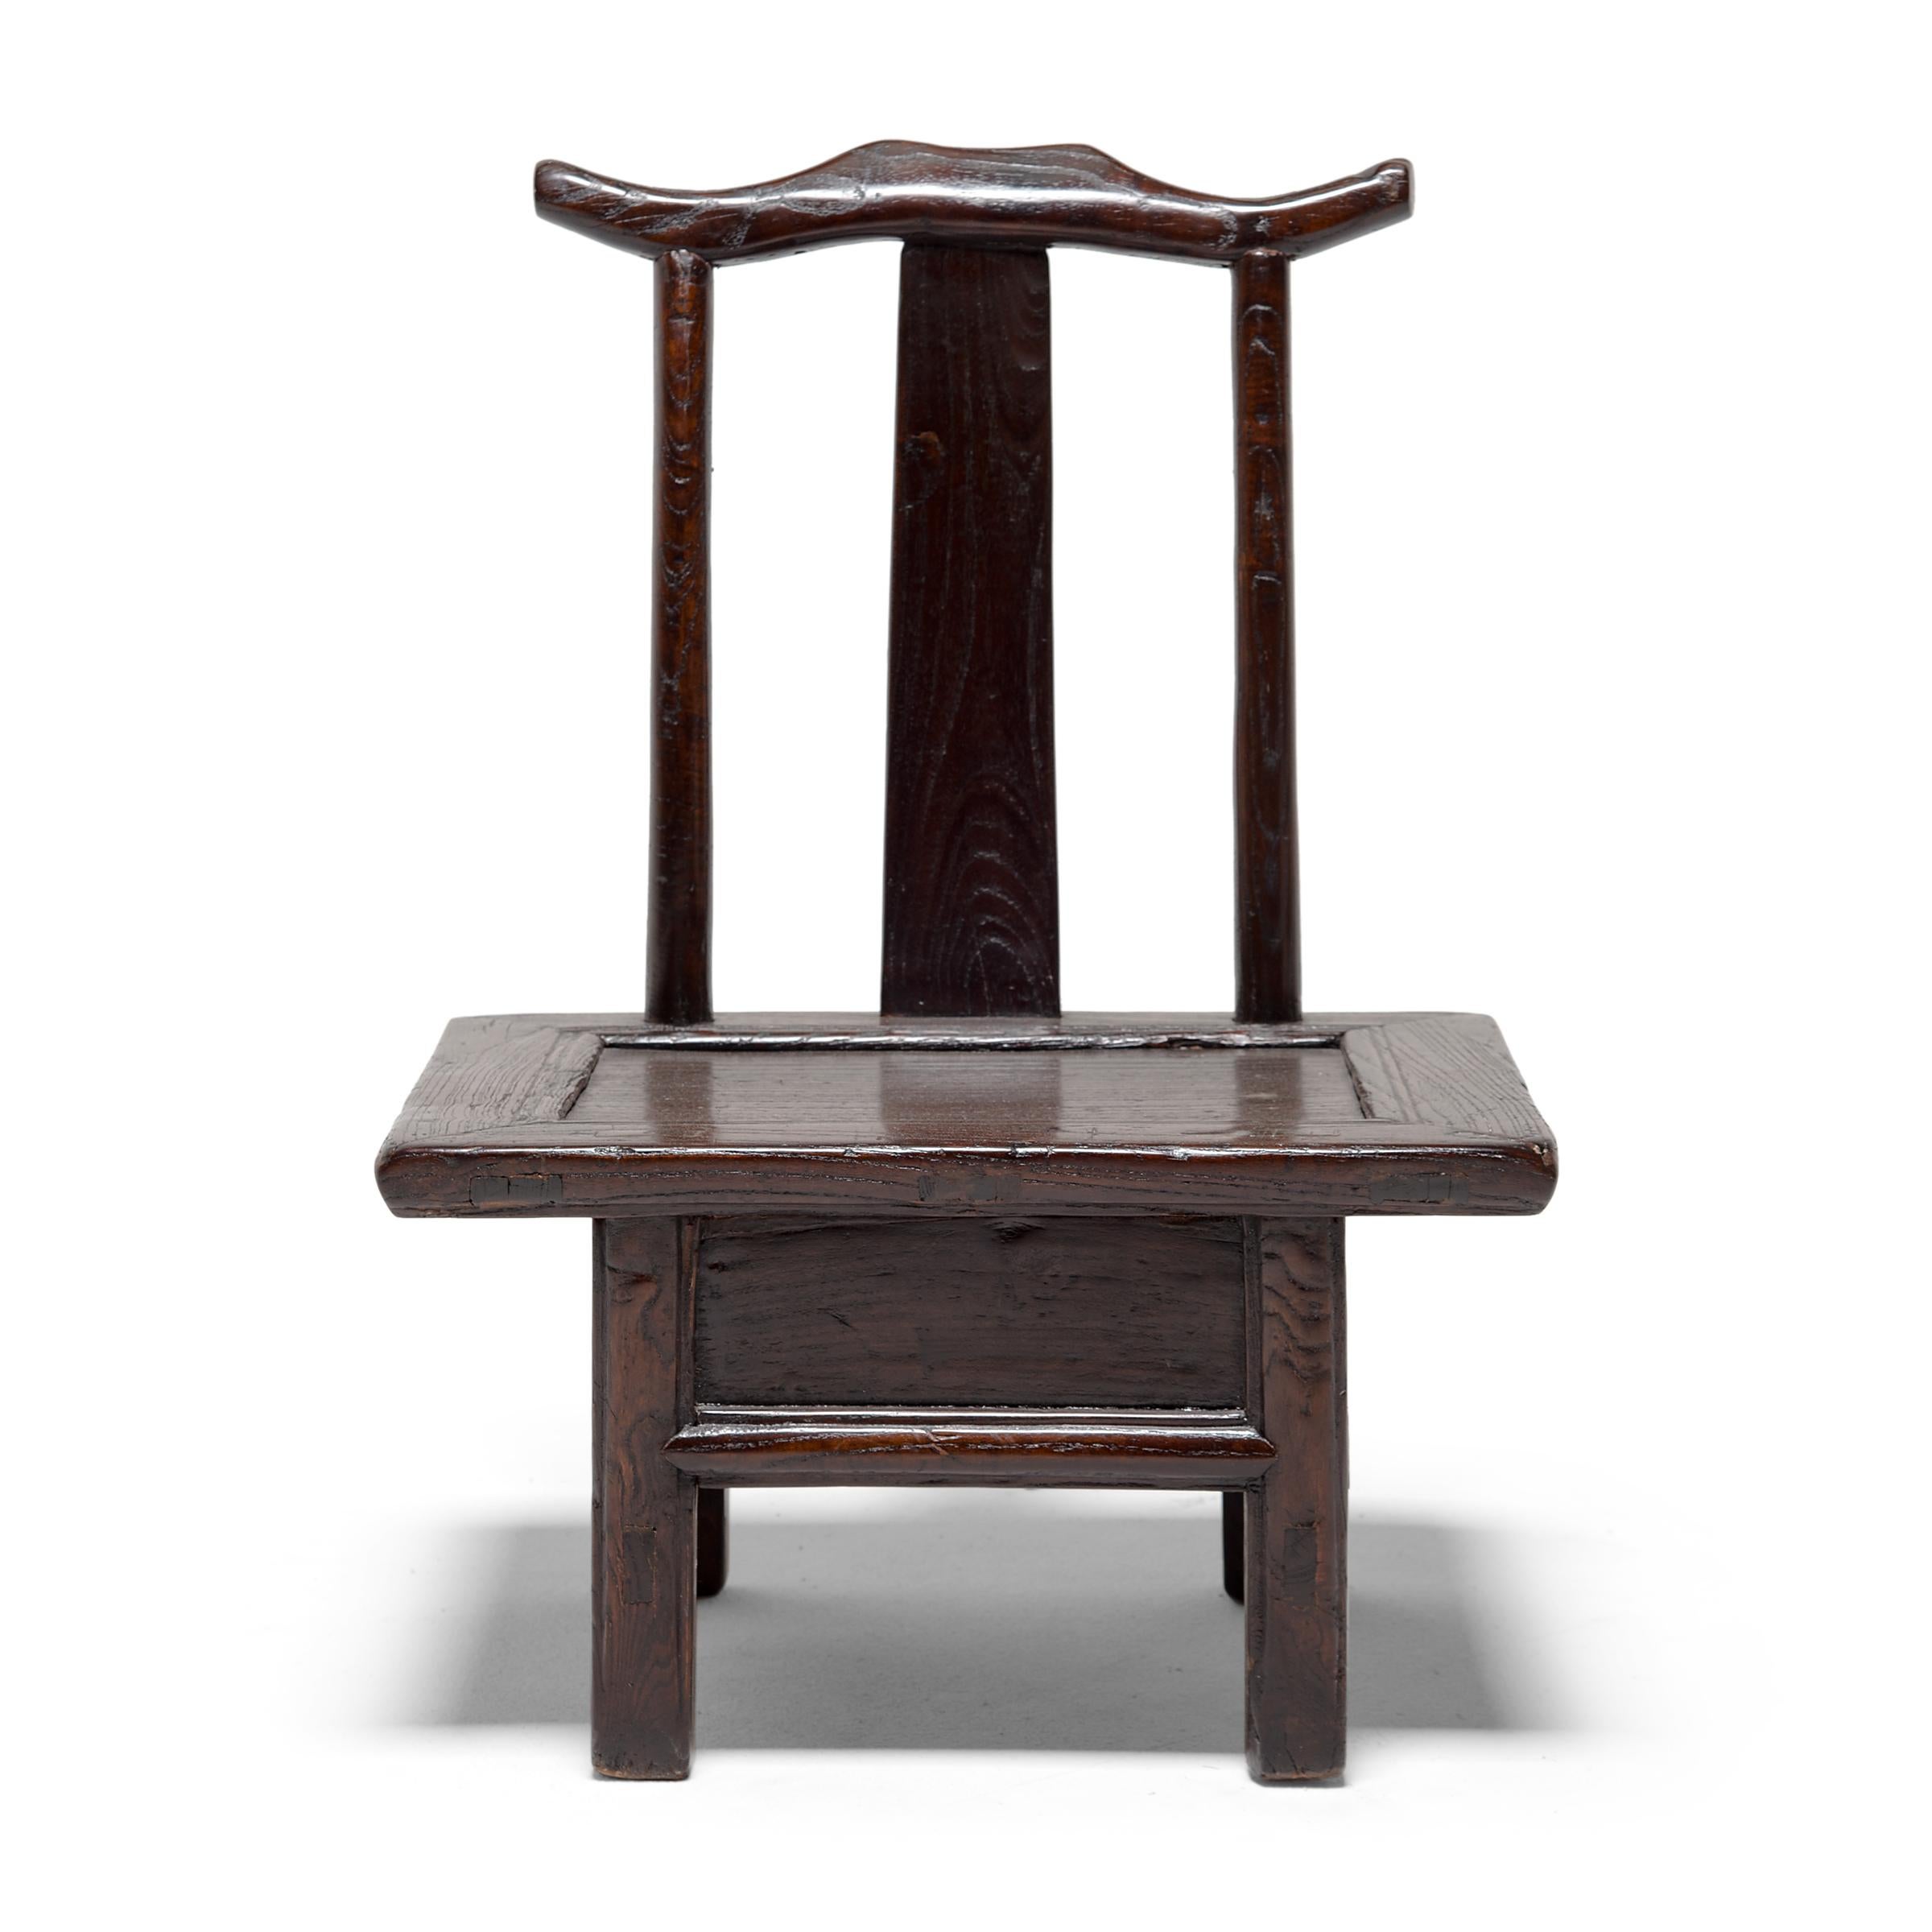 This petite 19th century chair from northern China is a children's chair designed to resemble a 